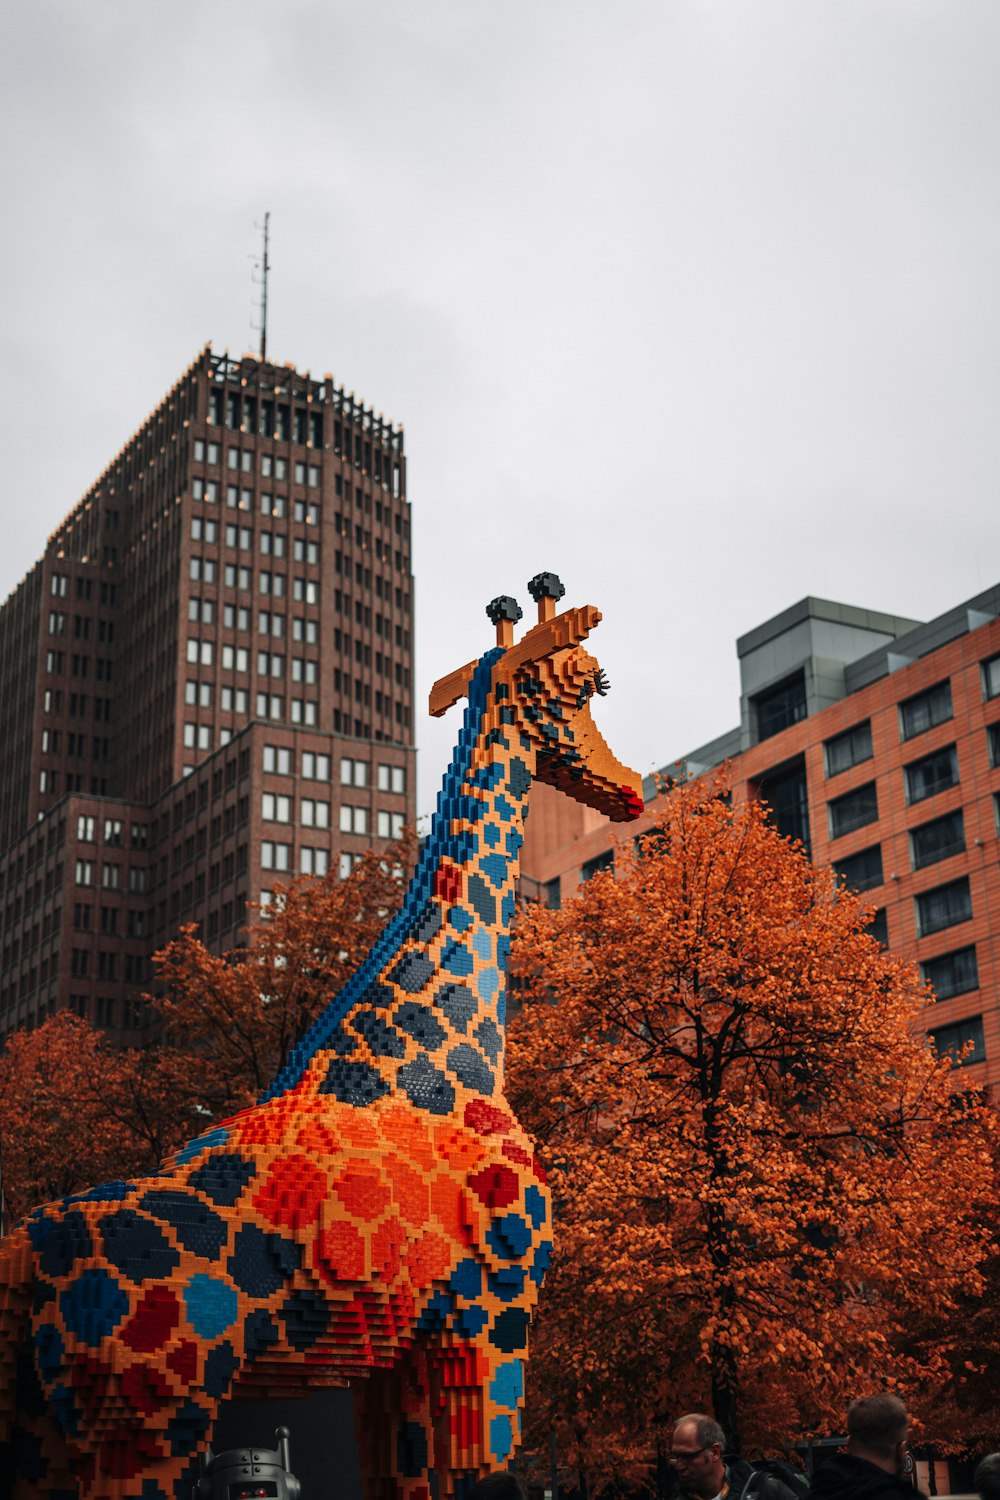 a giant giraffe made out of legos in a city